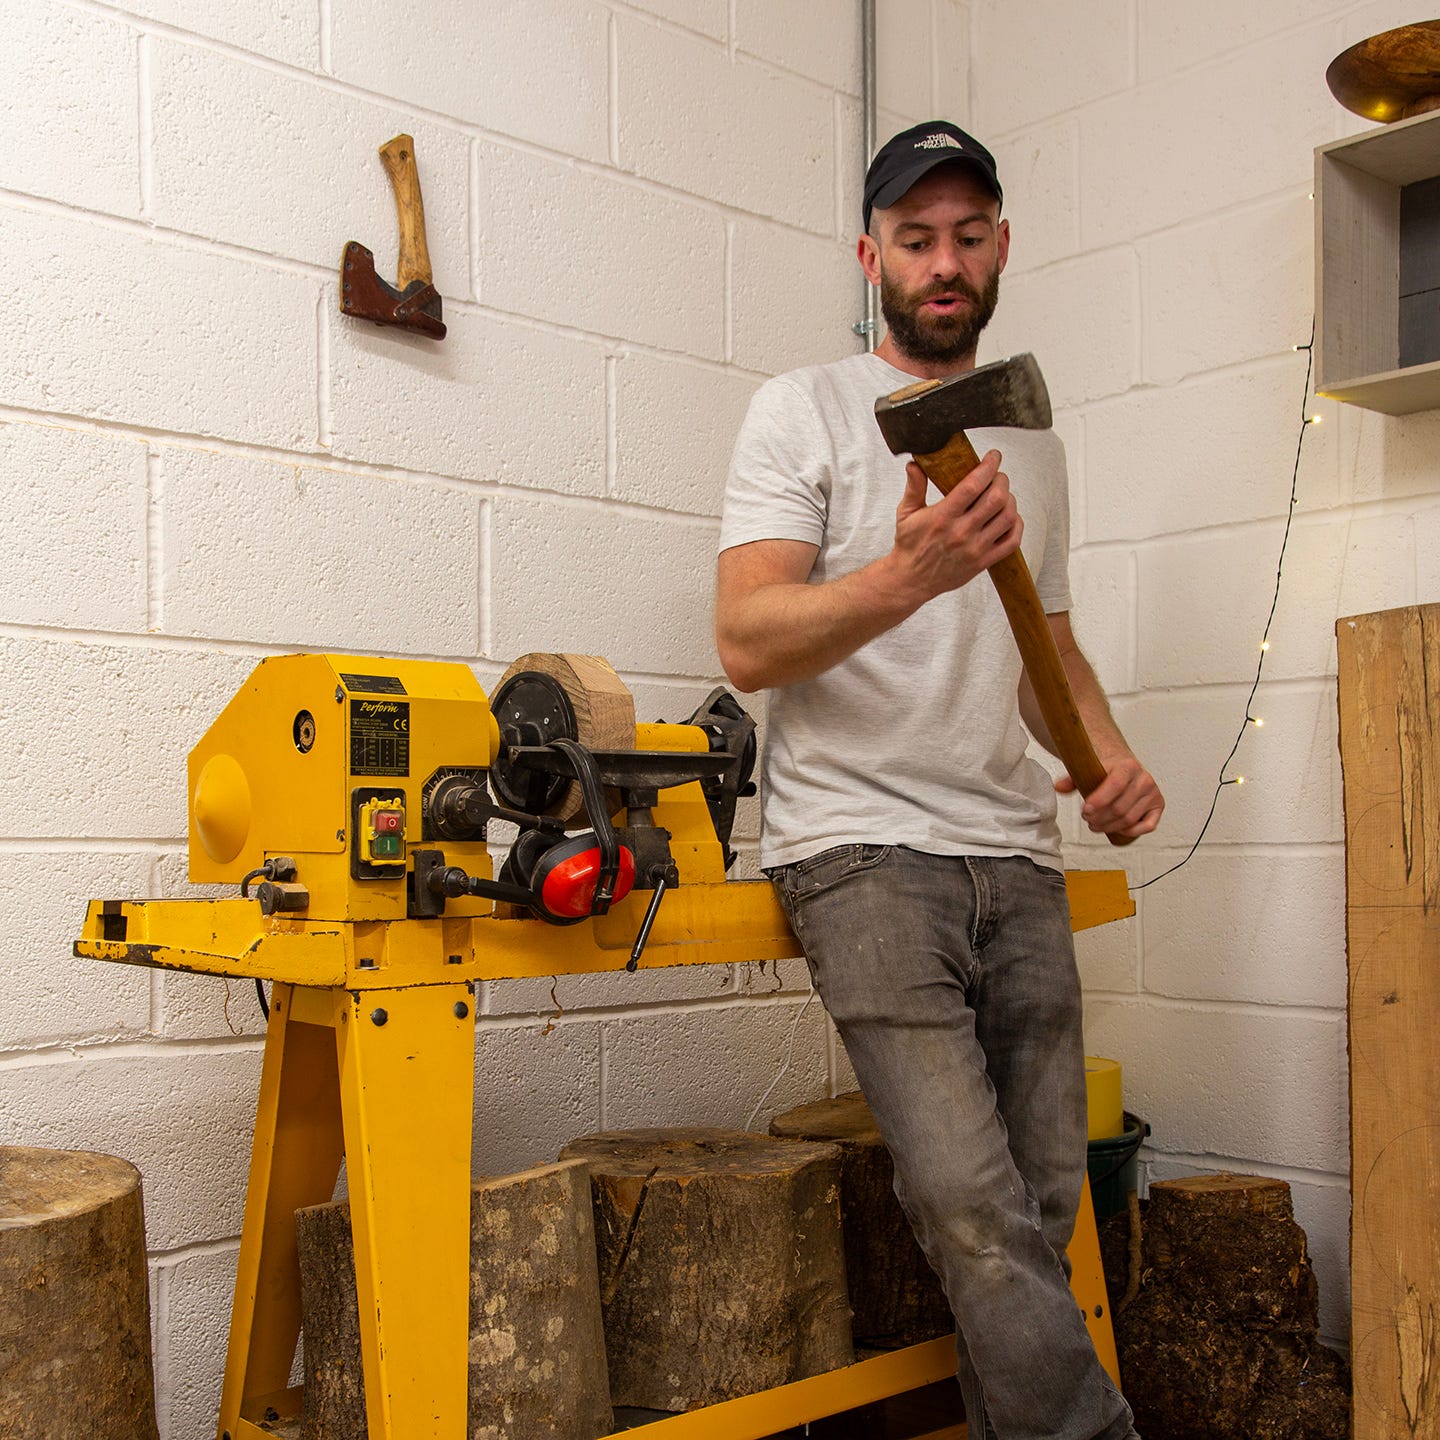 A woodworker holding an axe. Mike Groves of Skapa Woodturning